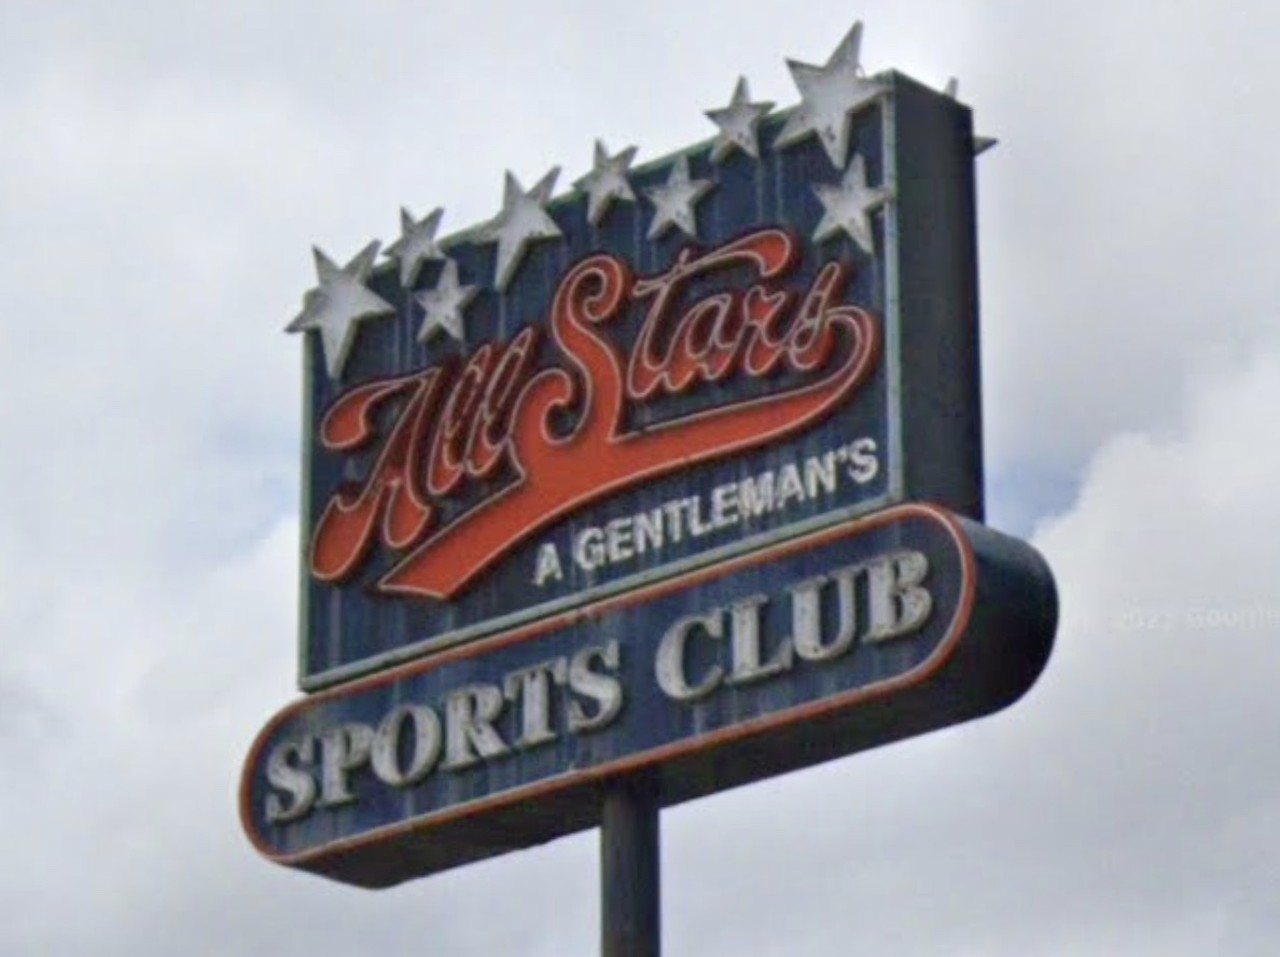 AllStars Gentlemen's Sports Club
9440 I-10
Northwest San Antonio's long running AllStars Gentlemen's Sports Club closed in early 2024. The business’ owners did not publicly state a reason for its closure, but the iconic AllStars sign — a longtime I-10 landmark — was put up for sale on Facebook Marketplace, with a price of $30,000 or best offer.